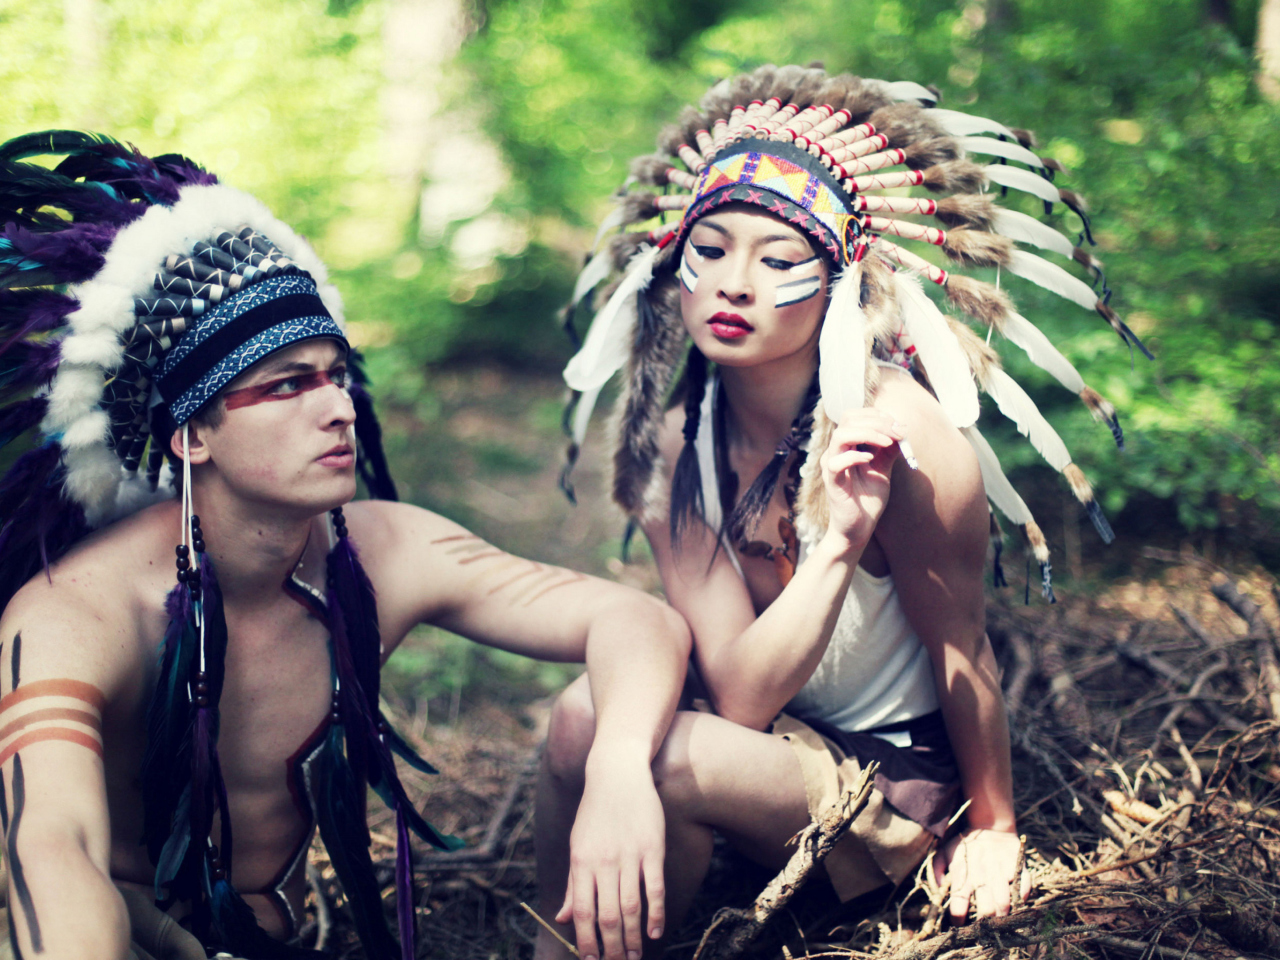 Indian Feather Hat wallpaper 1280x960